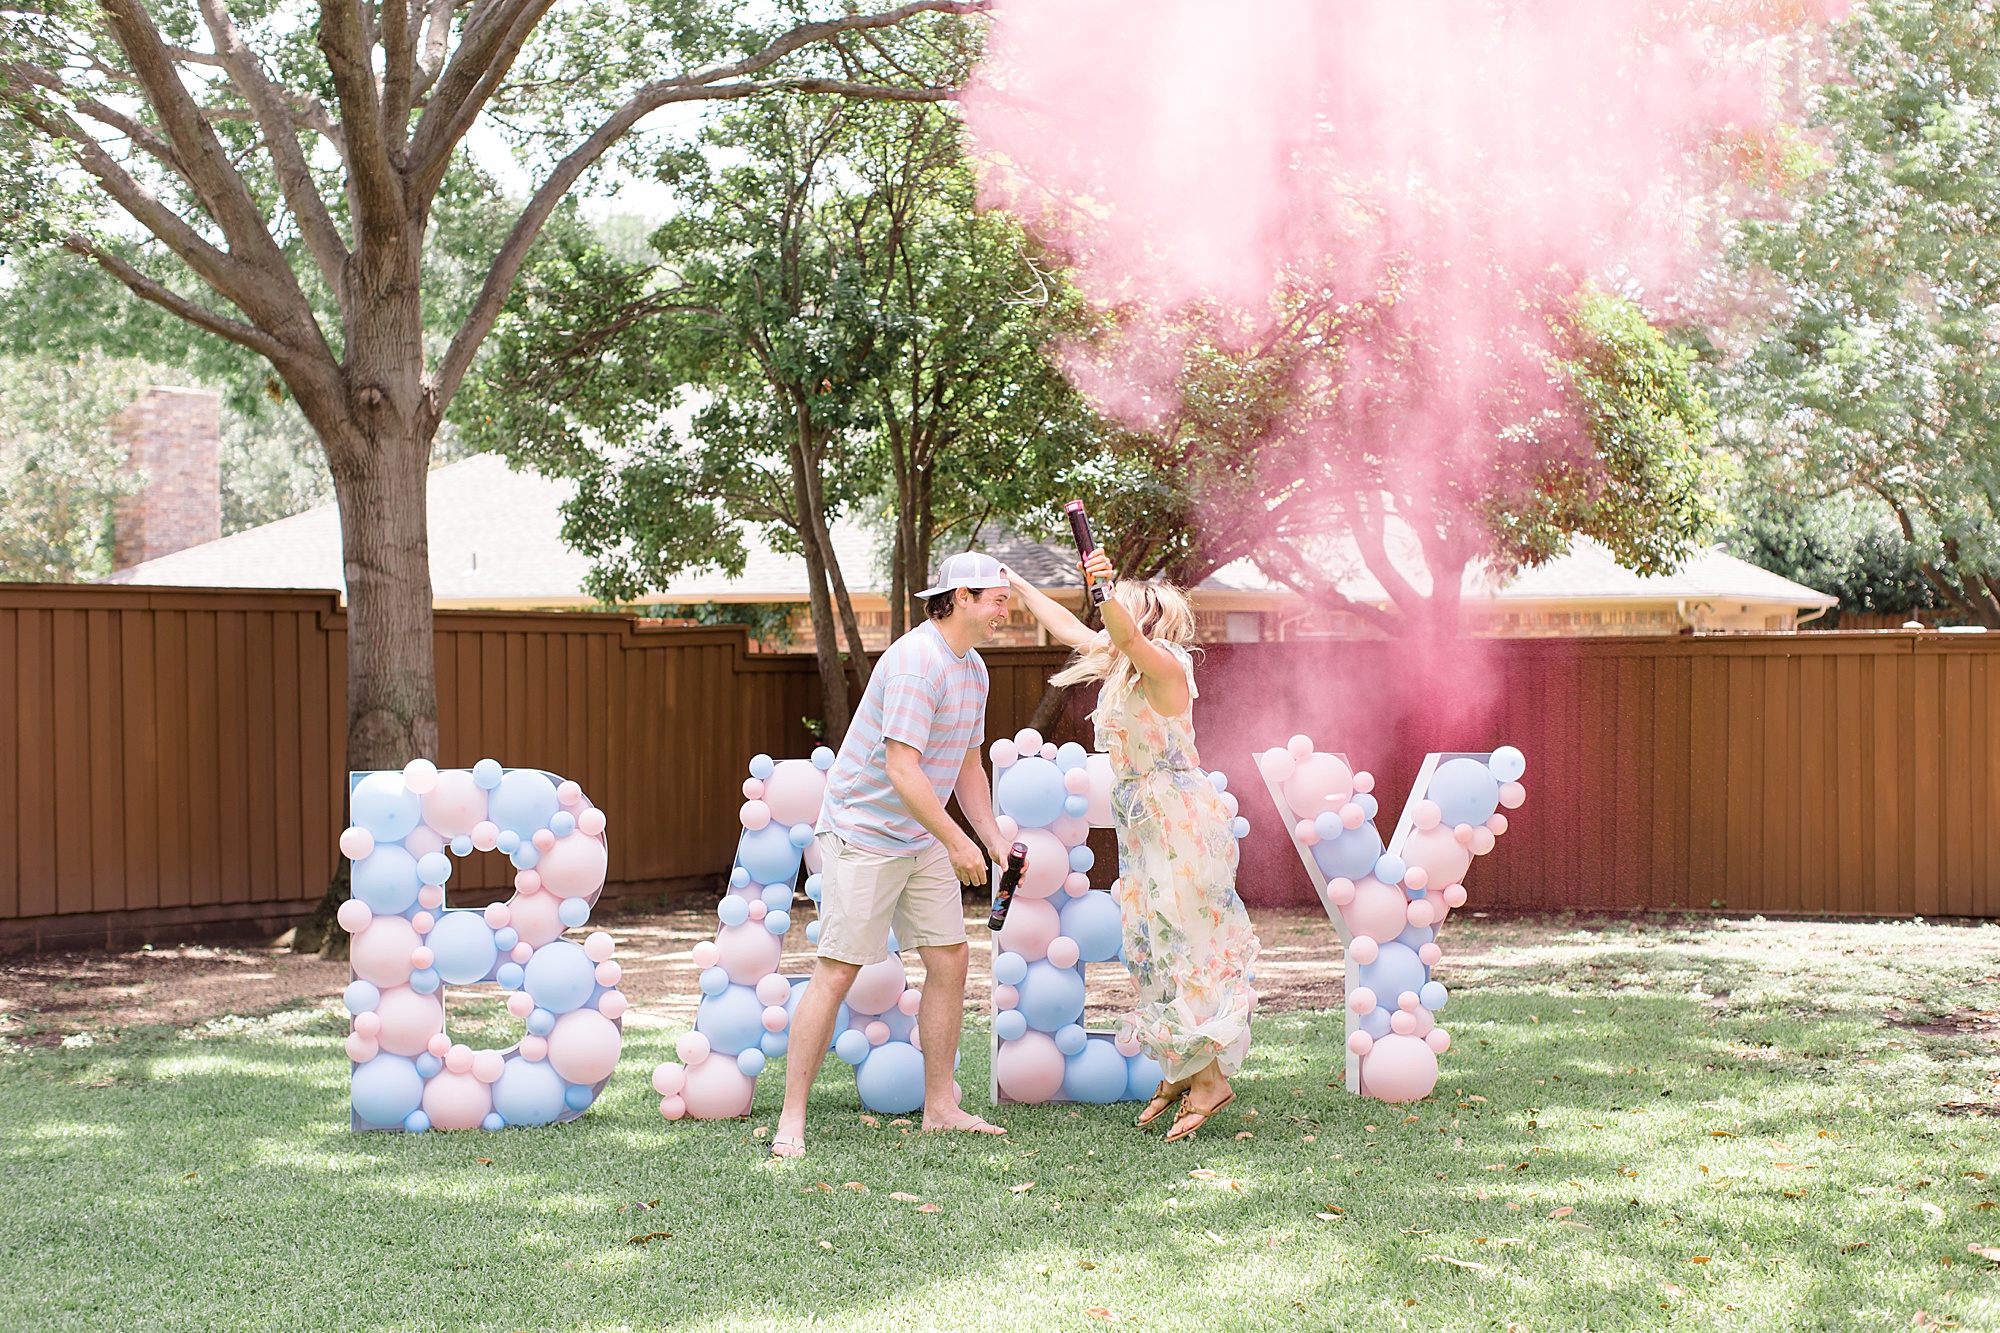 parents jump during reveal for BABY gender reveal party